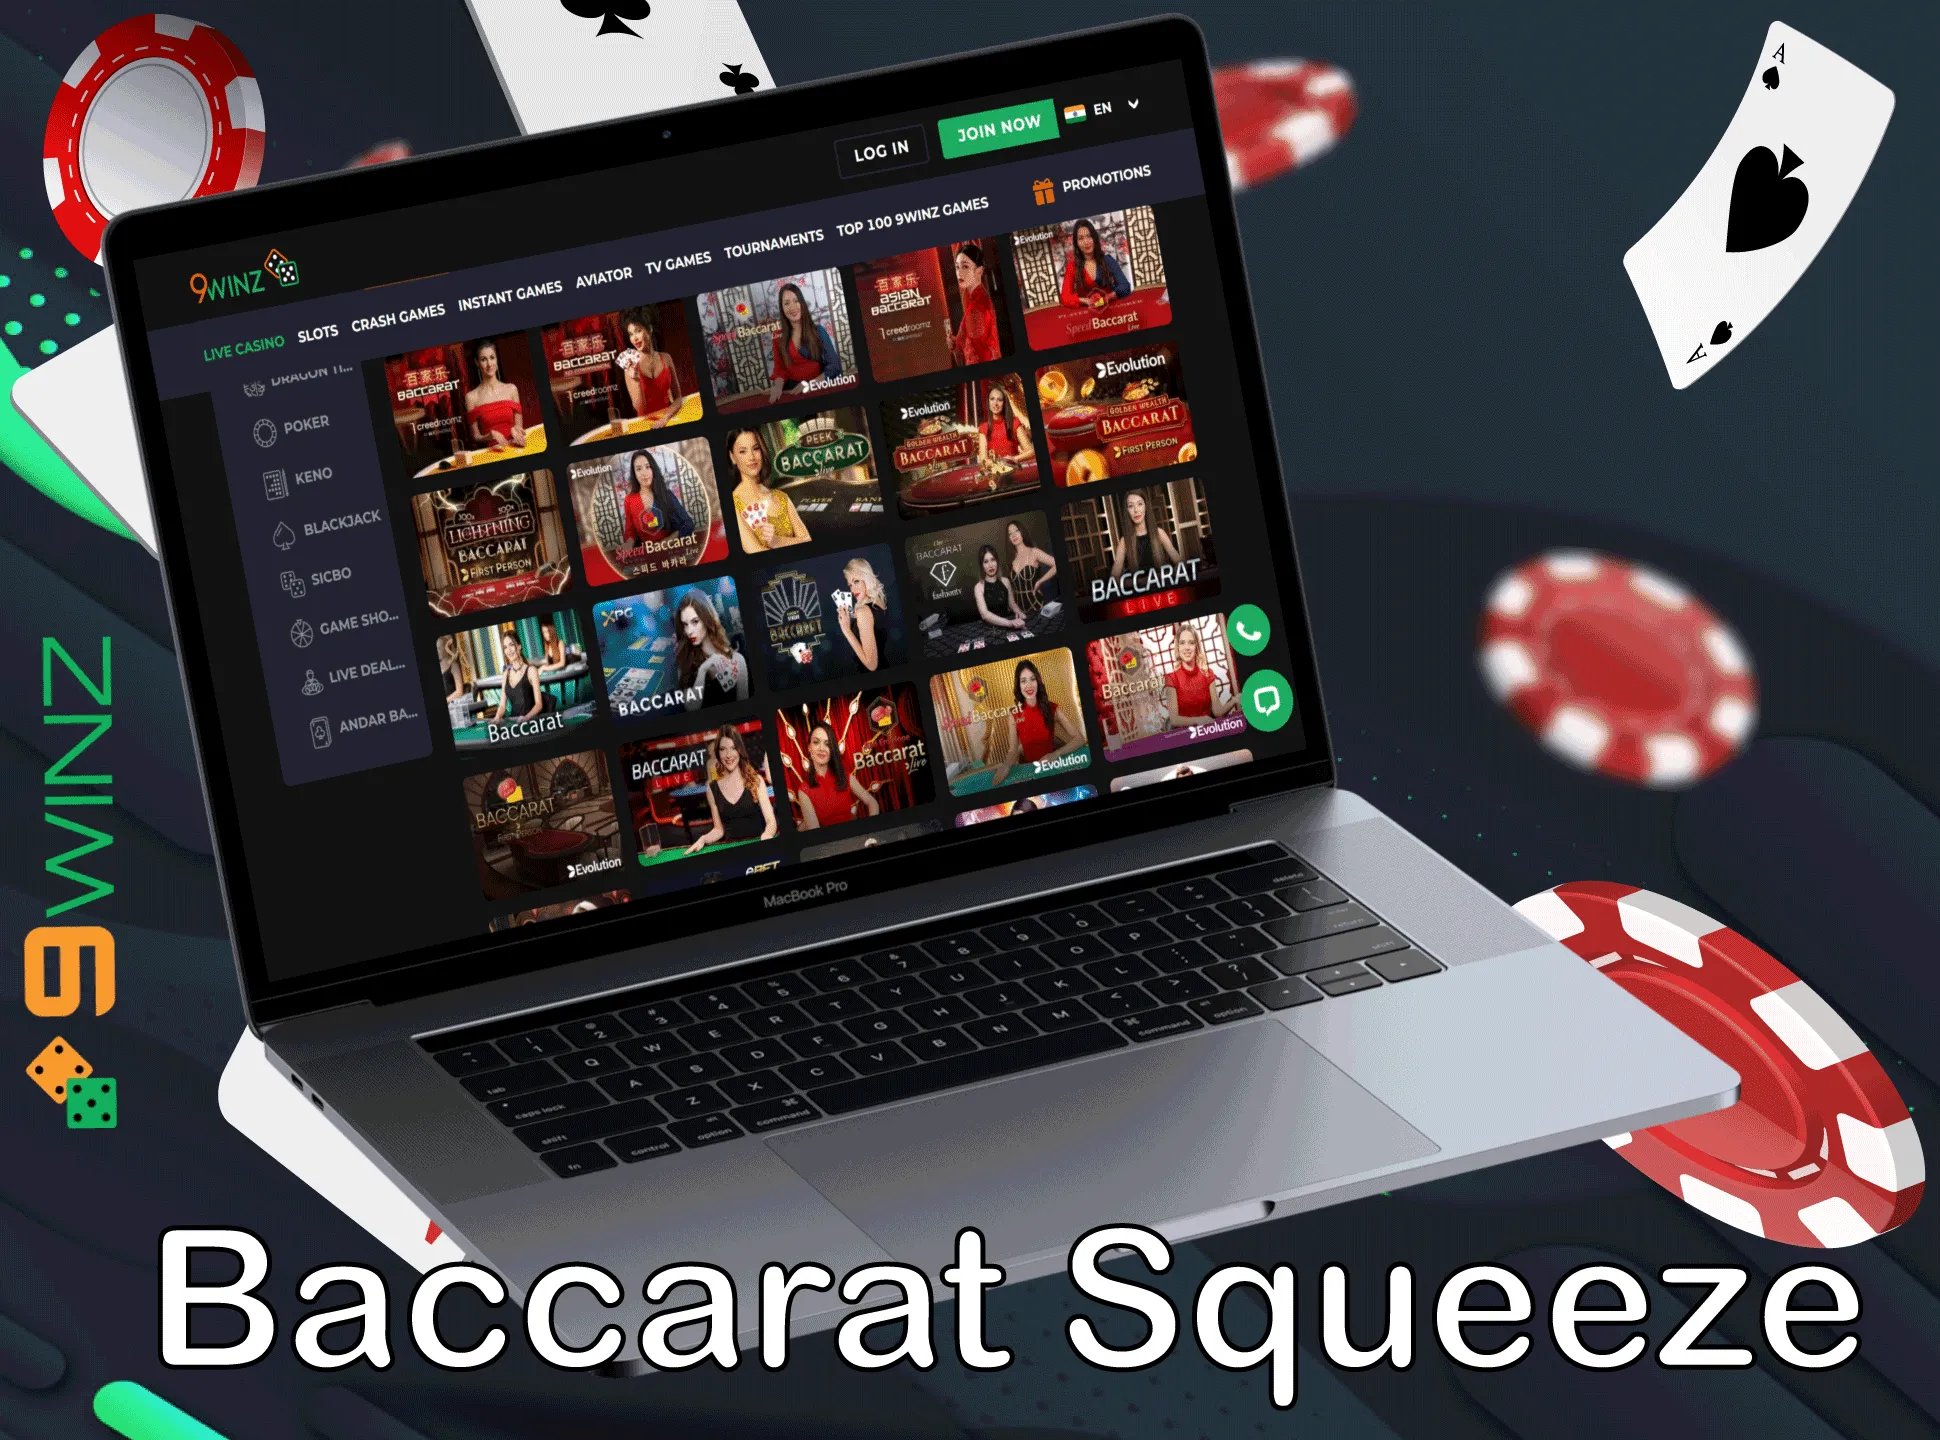 Try new squeeze version of baccarat at the 9winz casino.